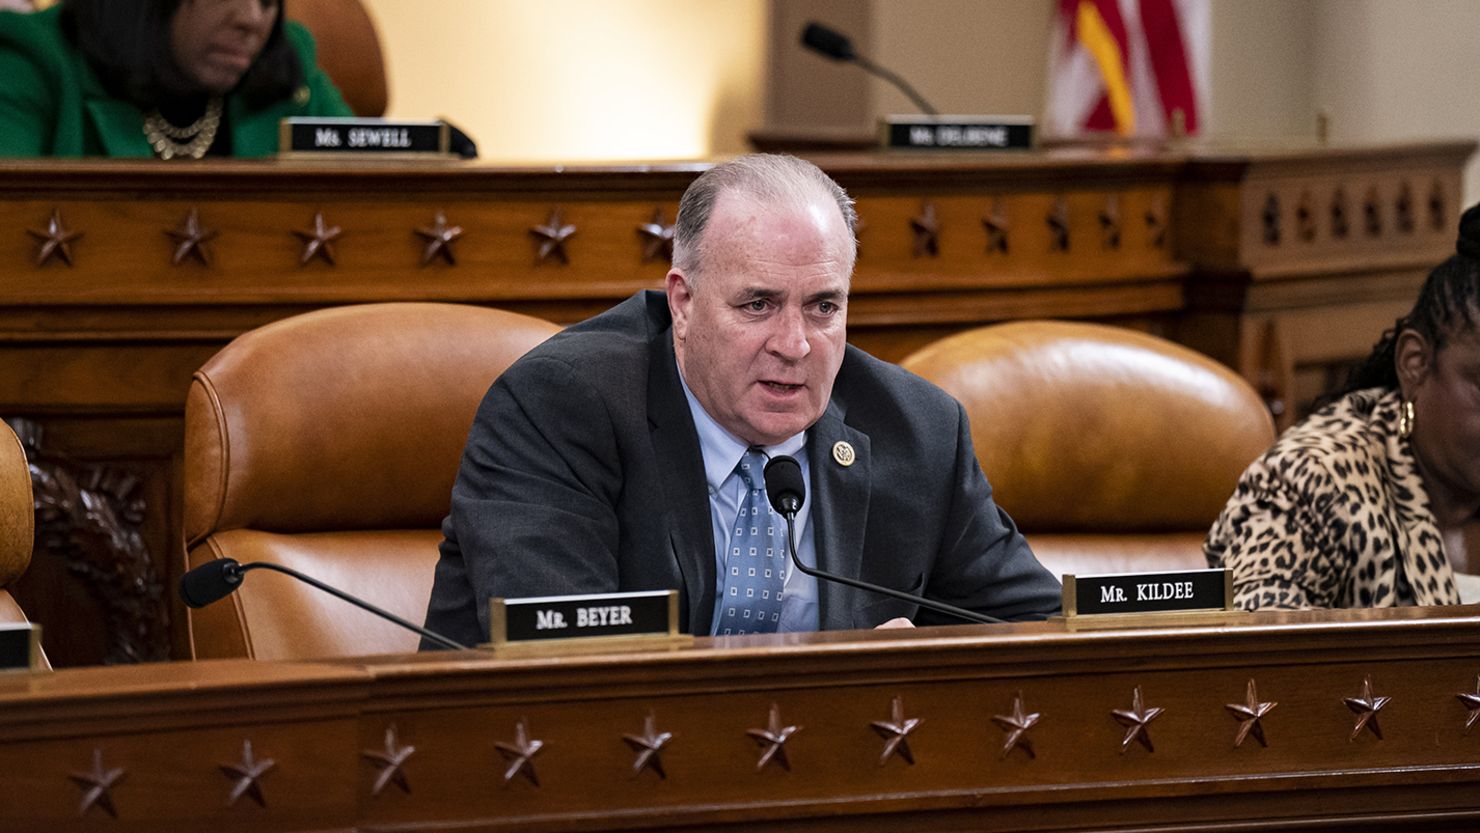 Rep. Dan Kildee, a Democrat from Michigan, speaks during a House Ways and Means Committee hearing on Friday, March 10, 2023.